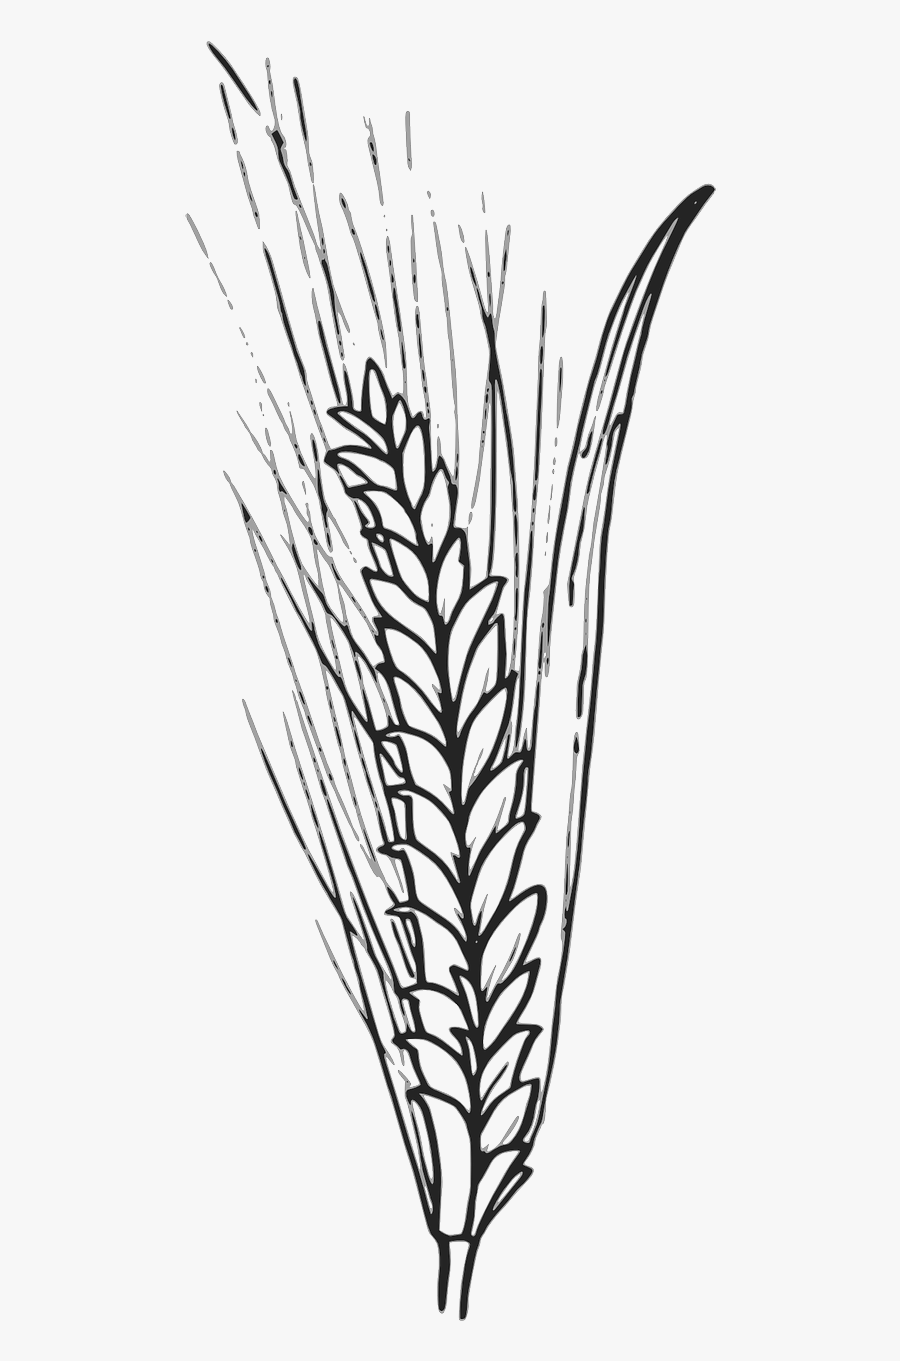 Cereals Grain Corn Wheat Barley Png Image - Wheat Outlines, Transparent Clipart